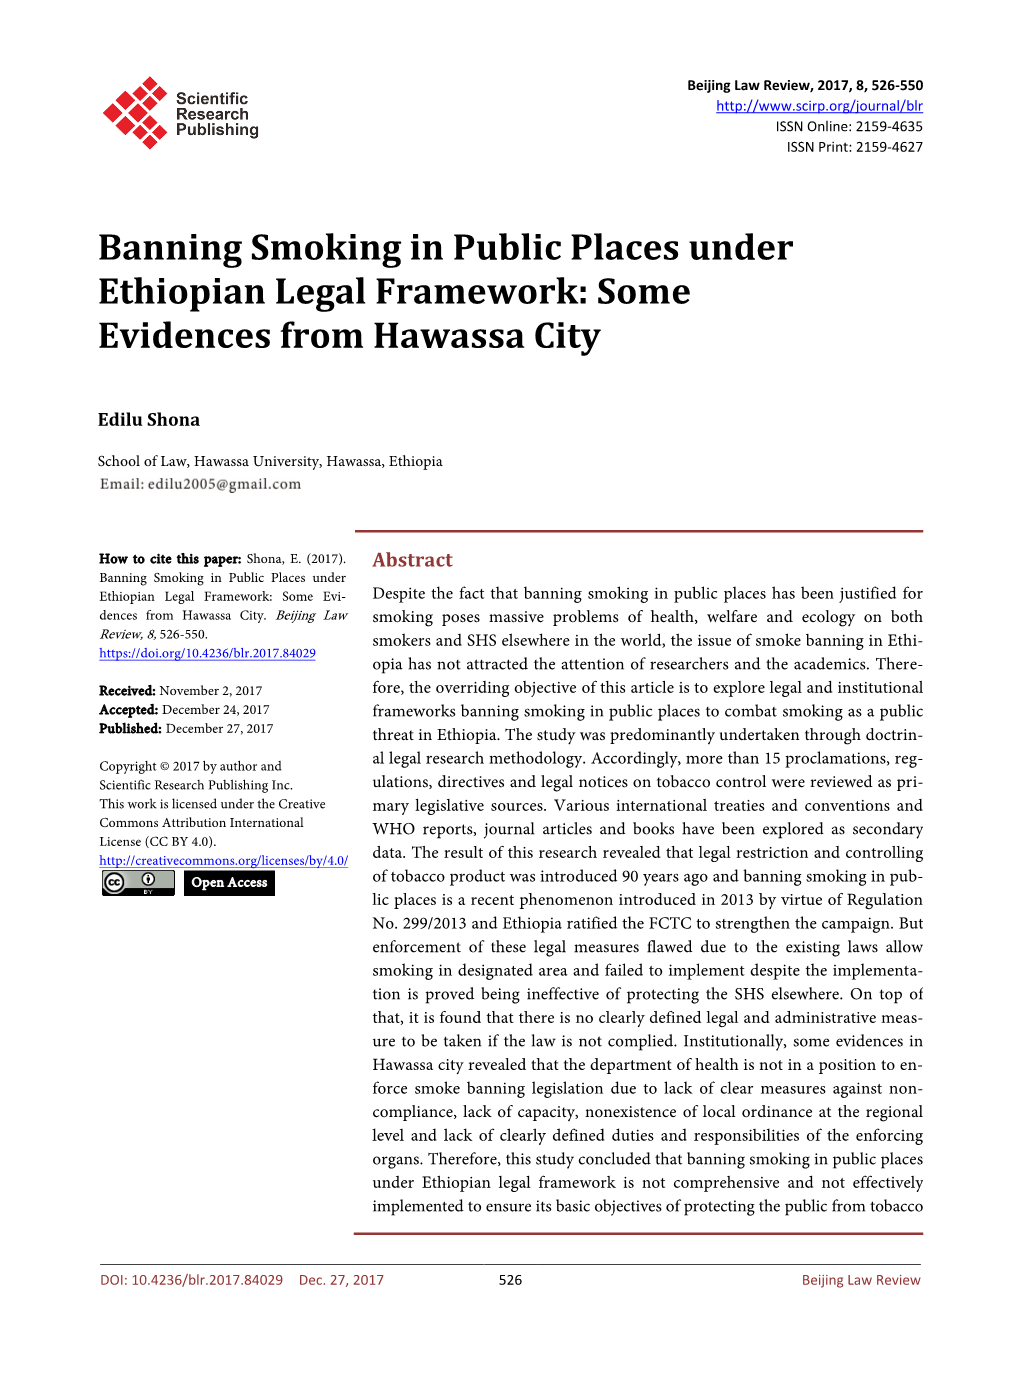 Banning Smoking in Public Places Under Ethiopian Legal Framework: Some Evidences from Hawassa City